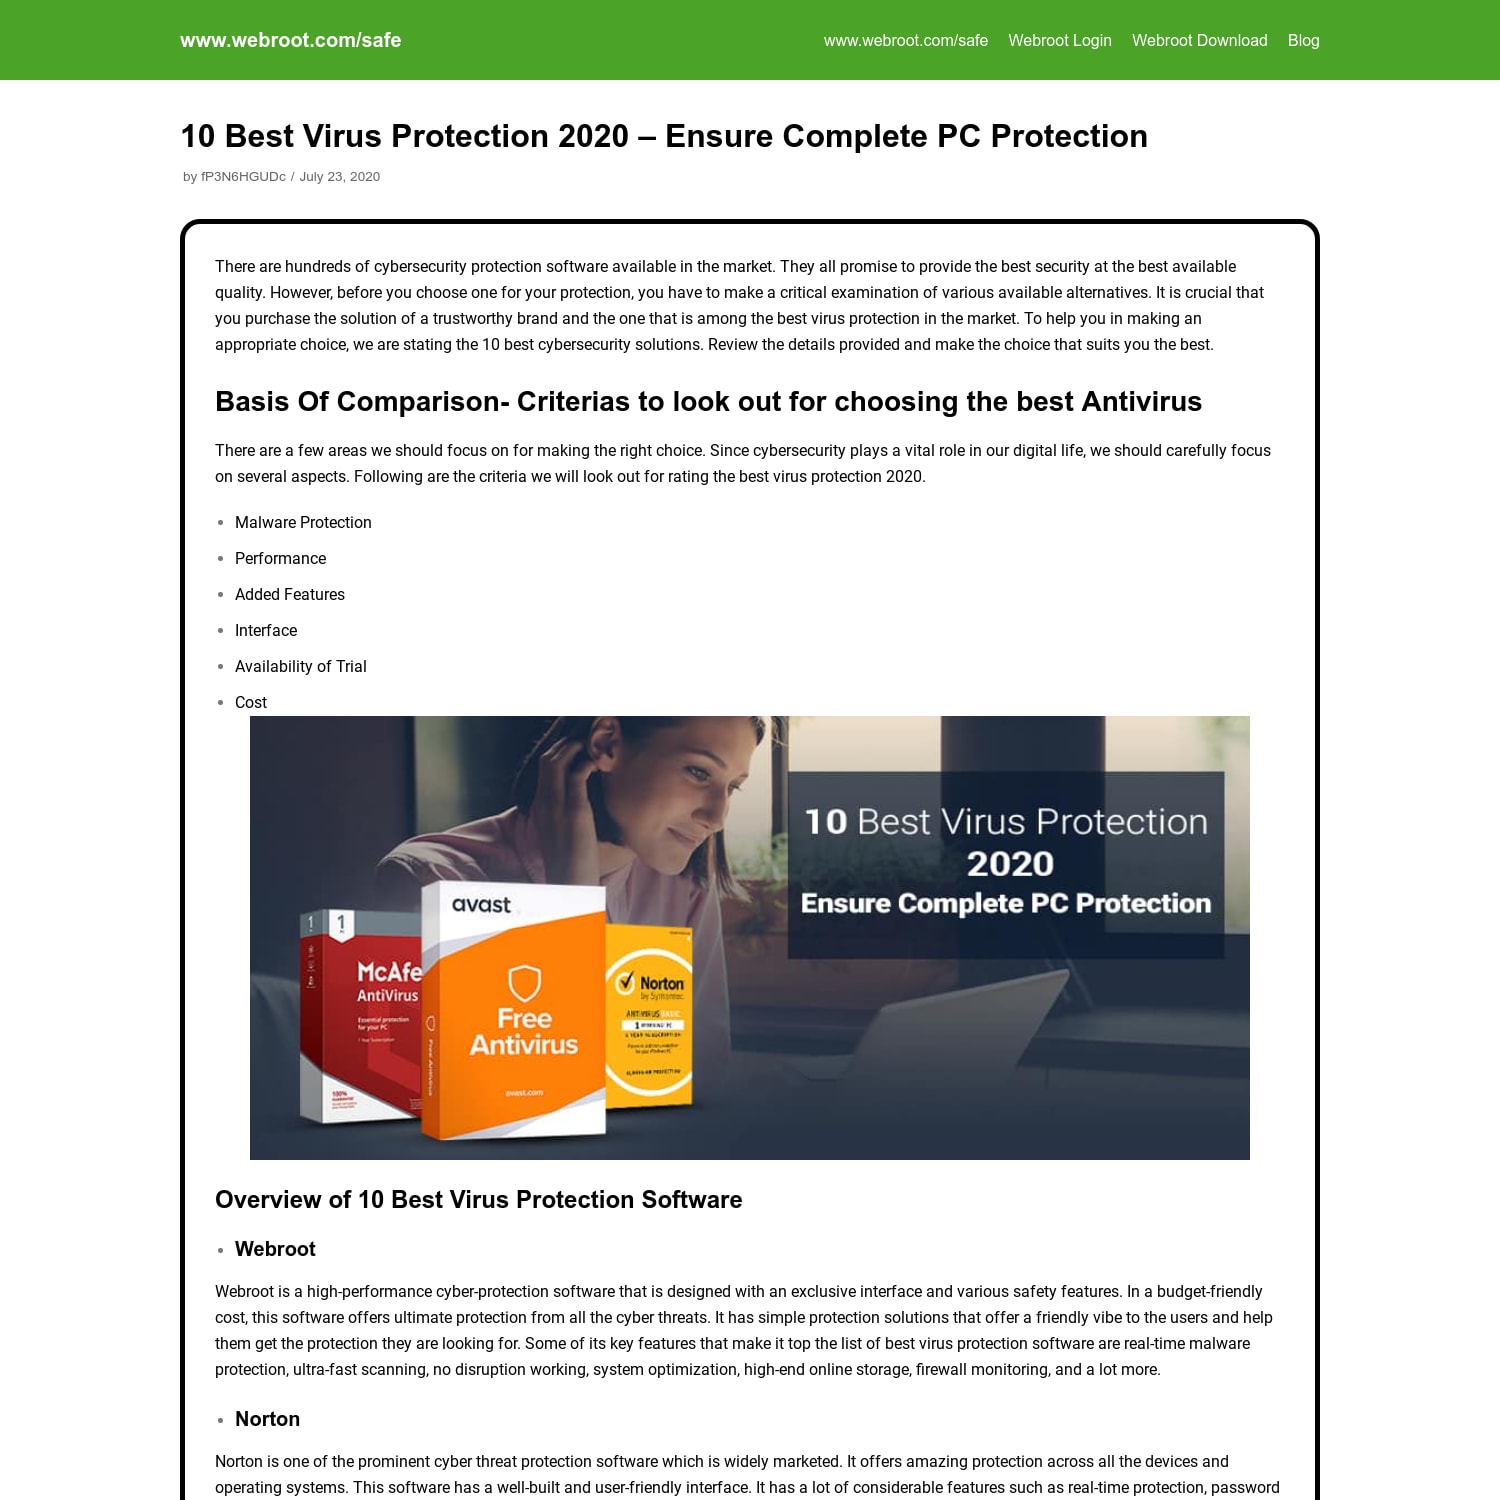 10 Best Virus Protection 2020 - Ensure Complete PC Protection